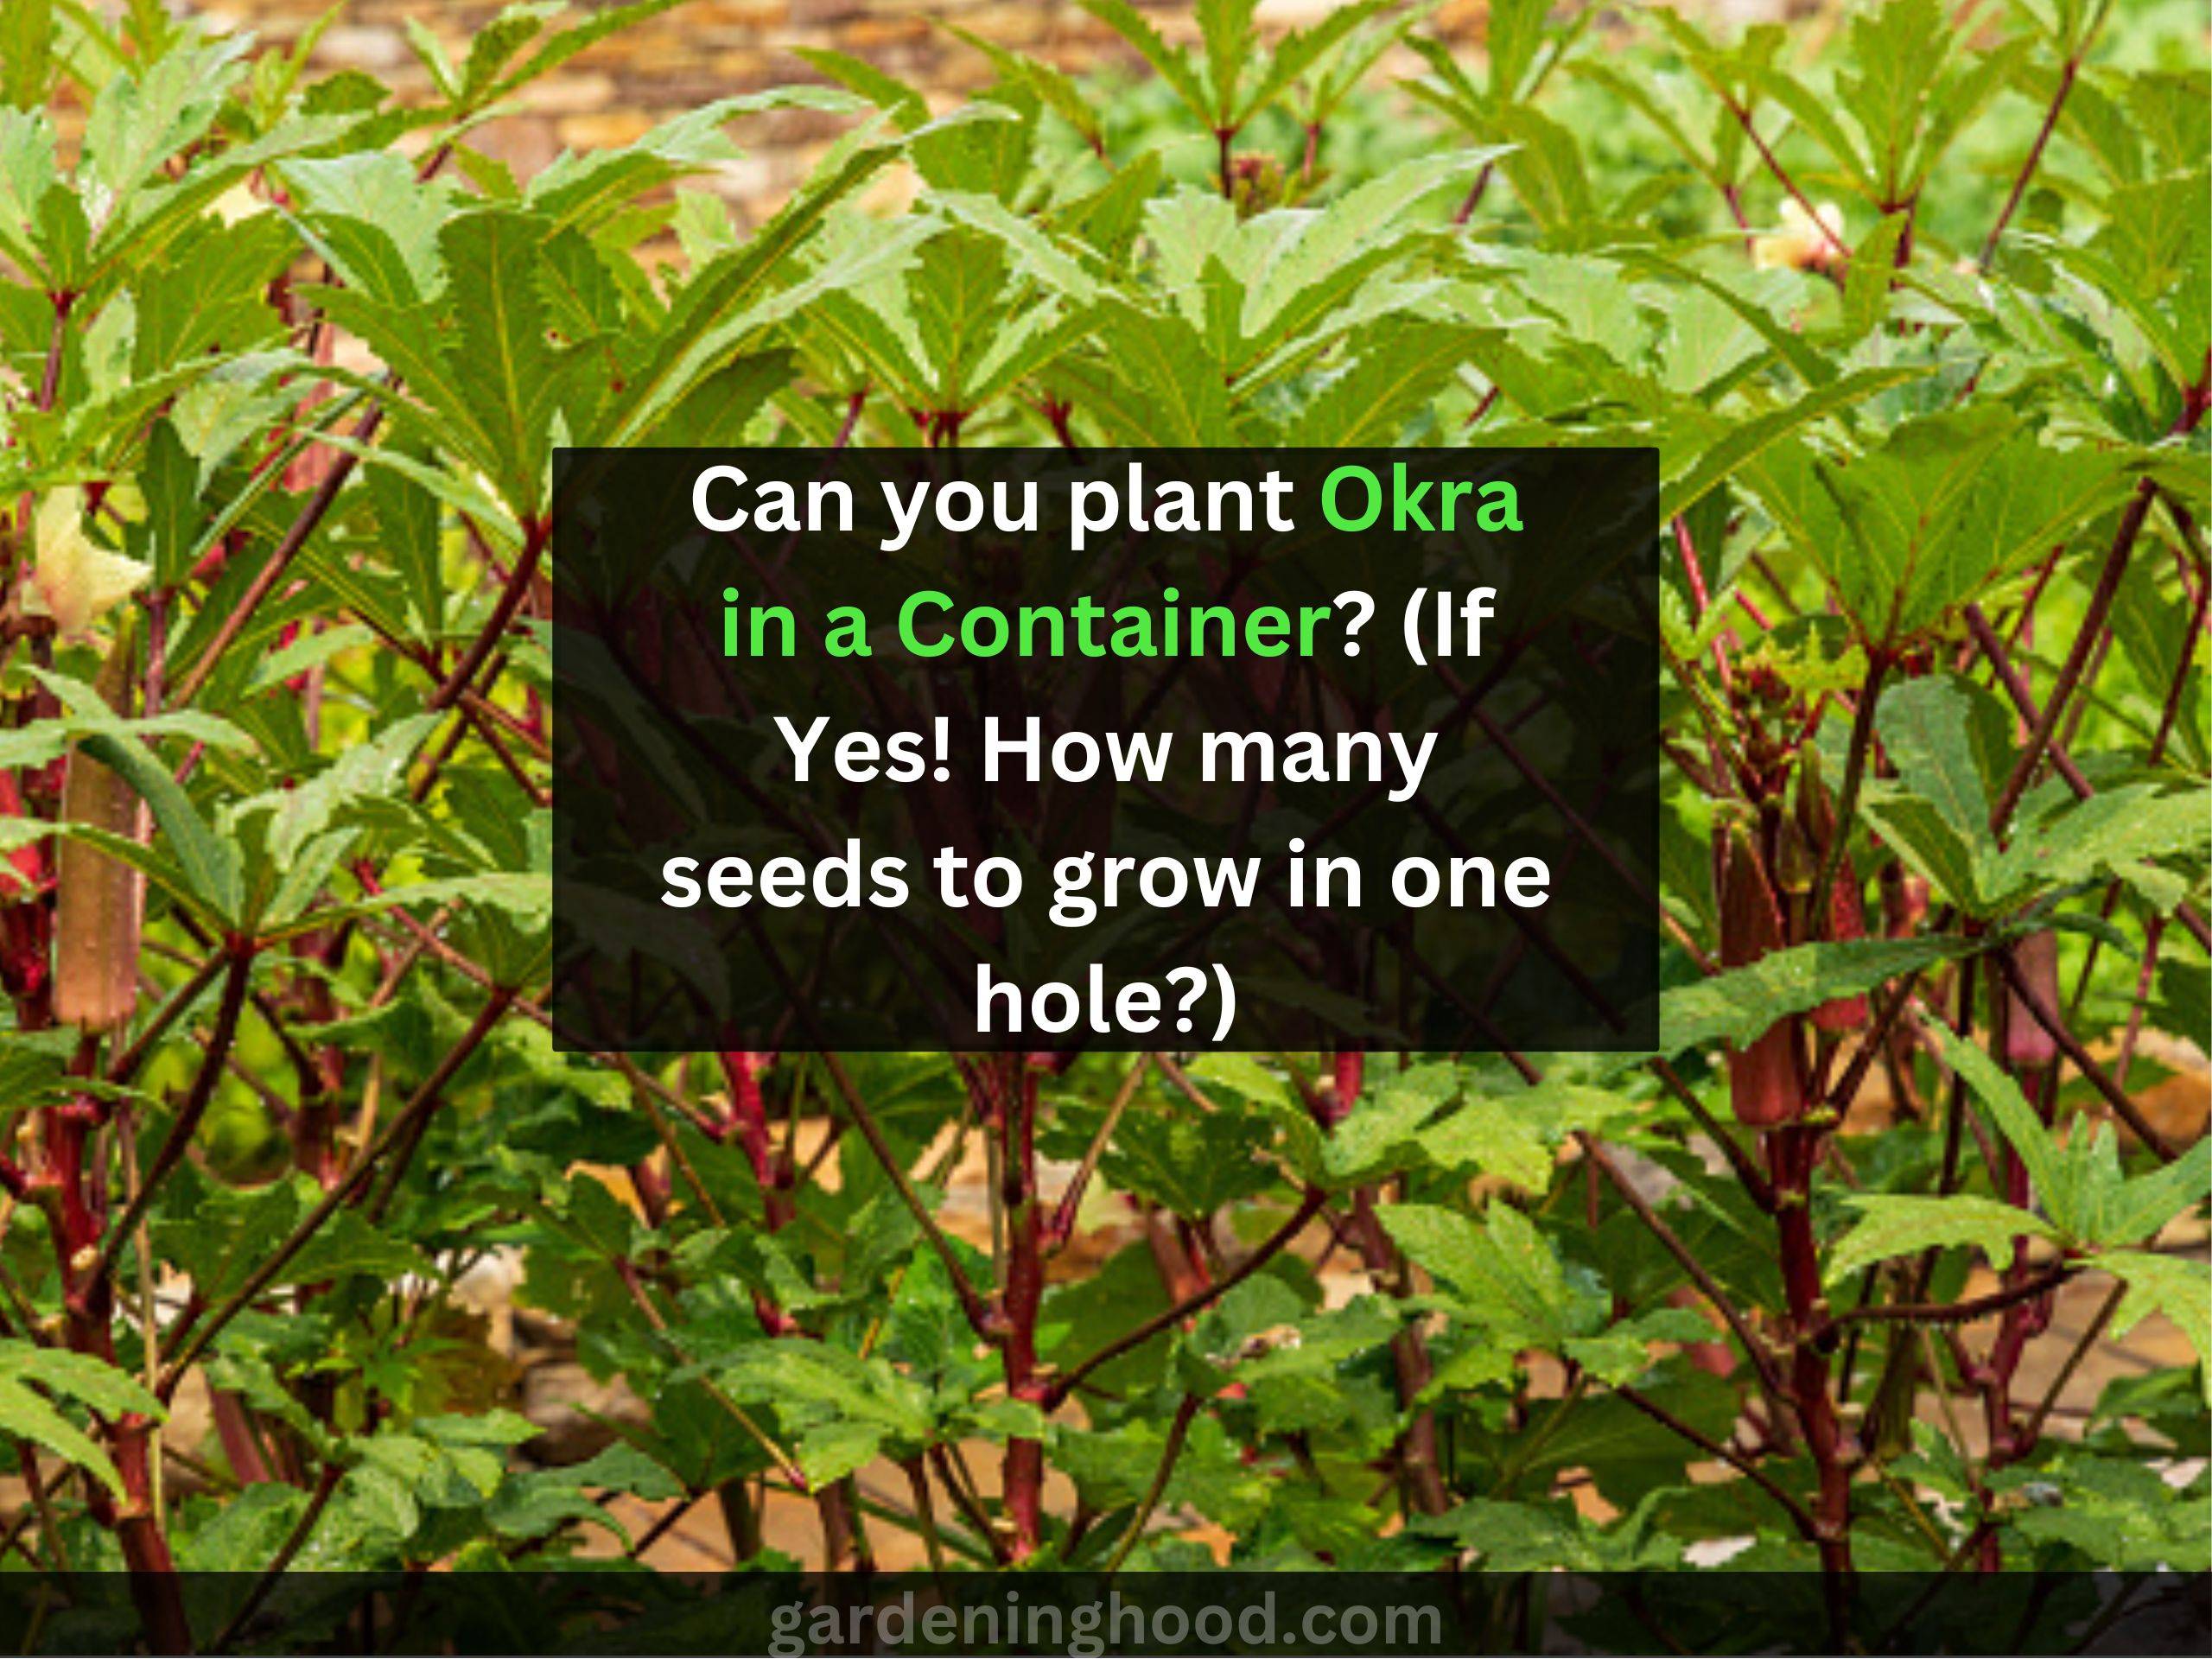 Can you plant Okra in a Container? (If Yes! How many seeds to grow in one hole?)